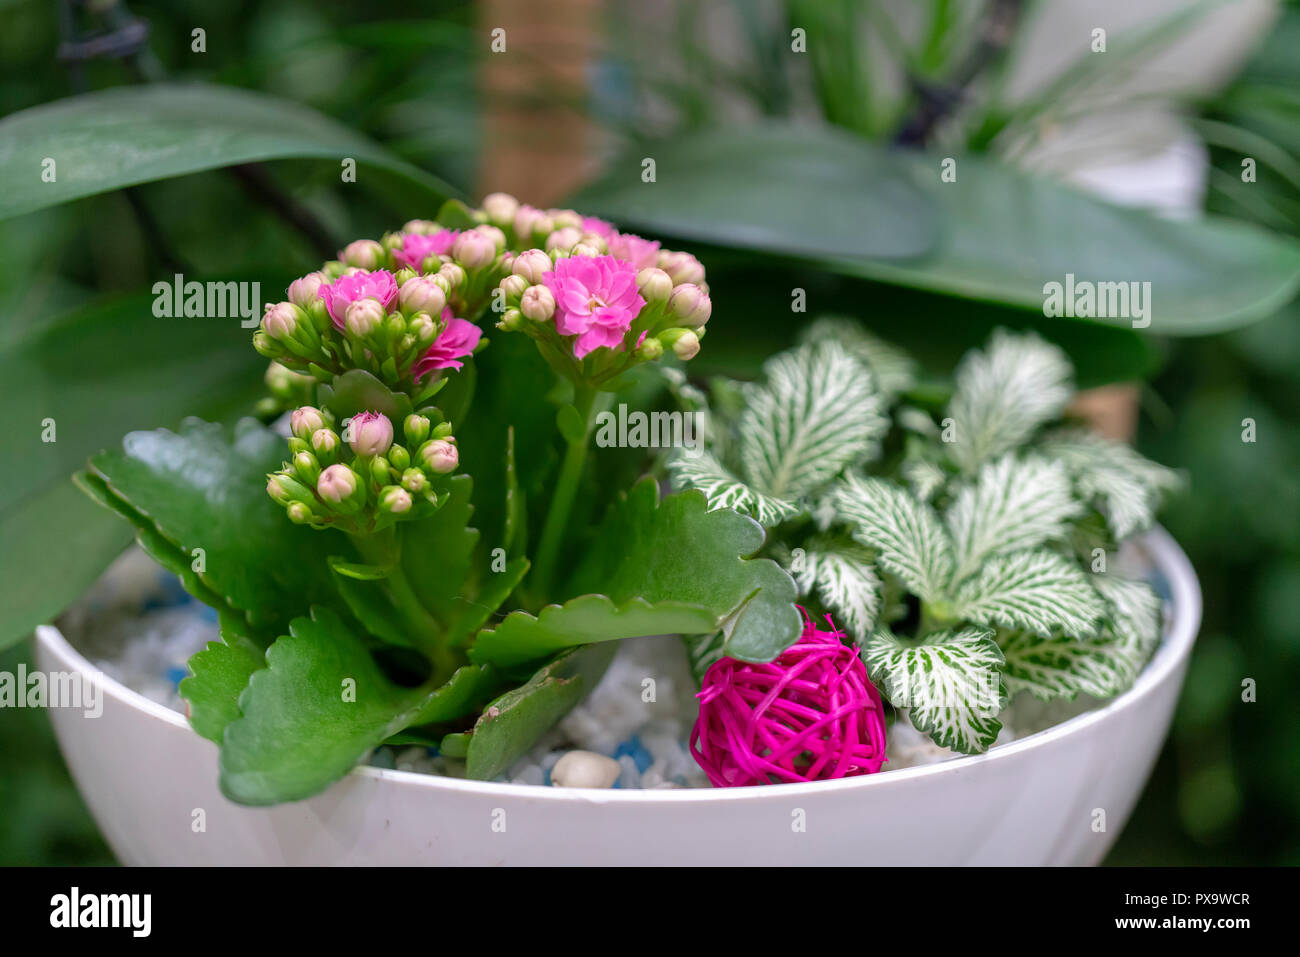 Beautiful composition of flowers in a pot. Stock Photo